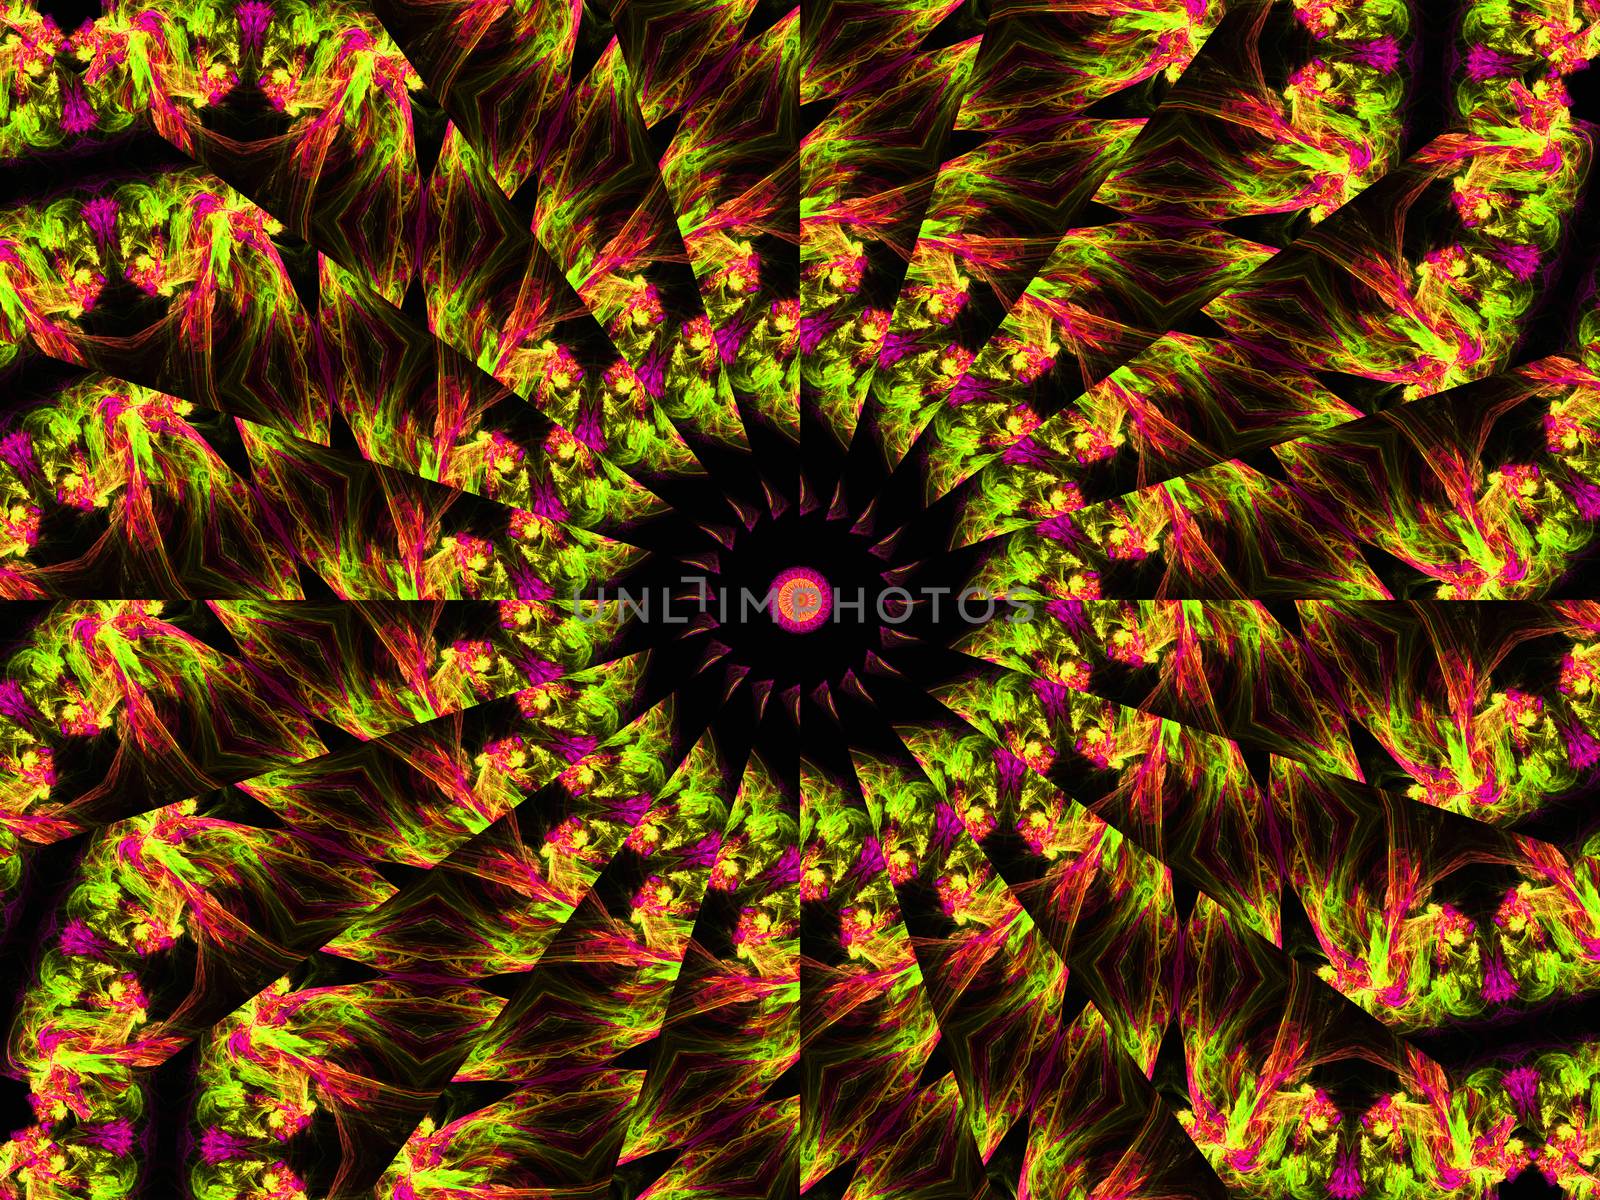 This image was created using fractal generating and graphic manipulation software.